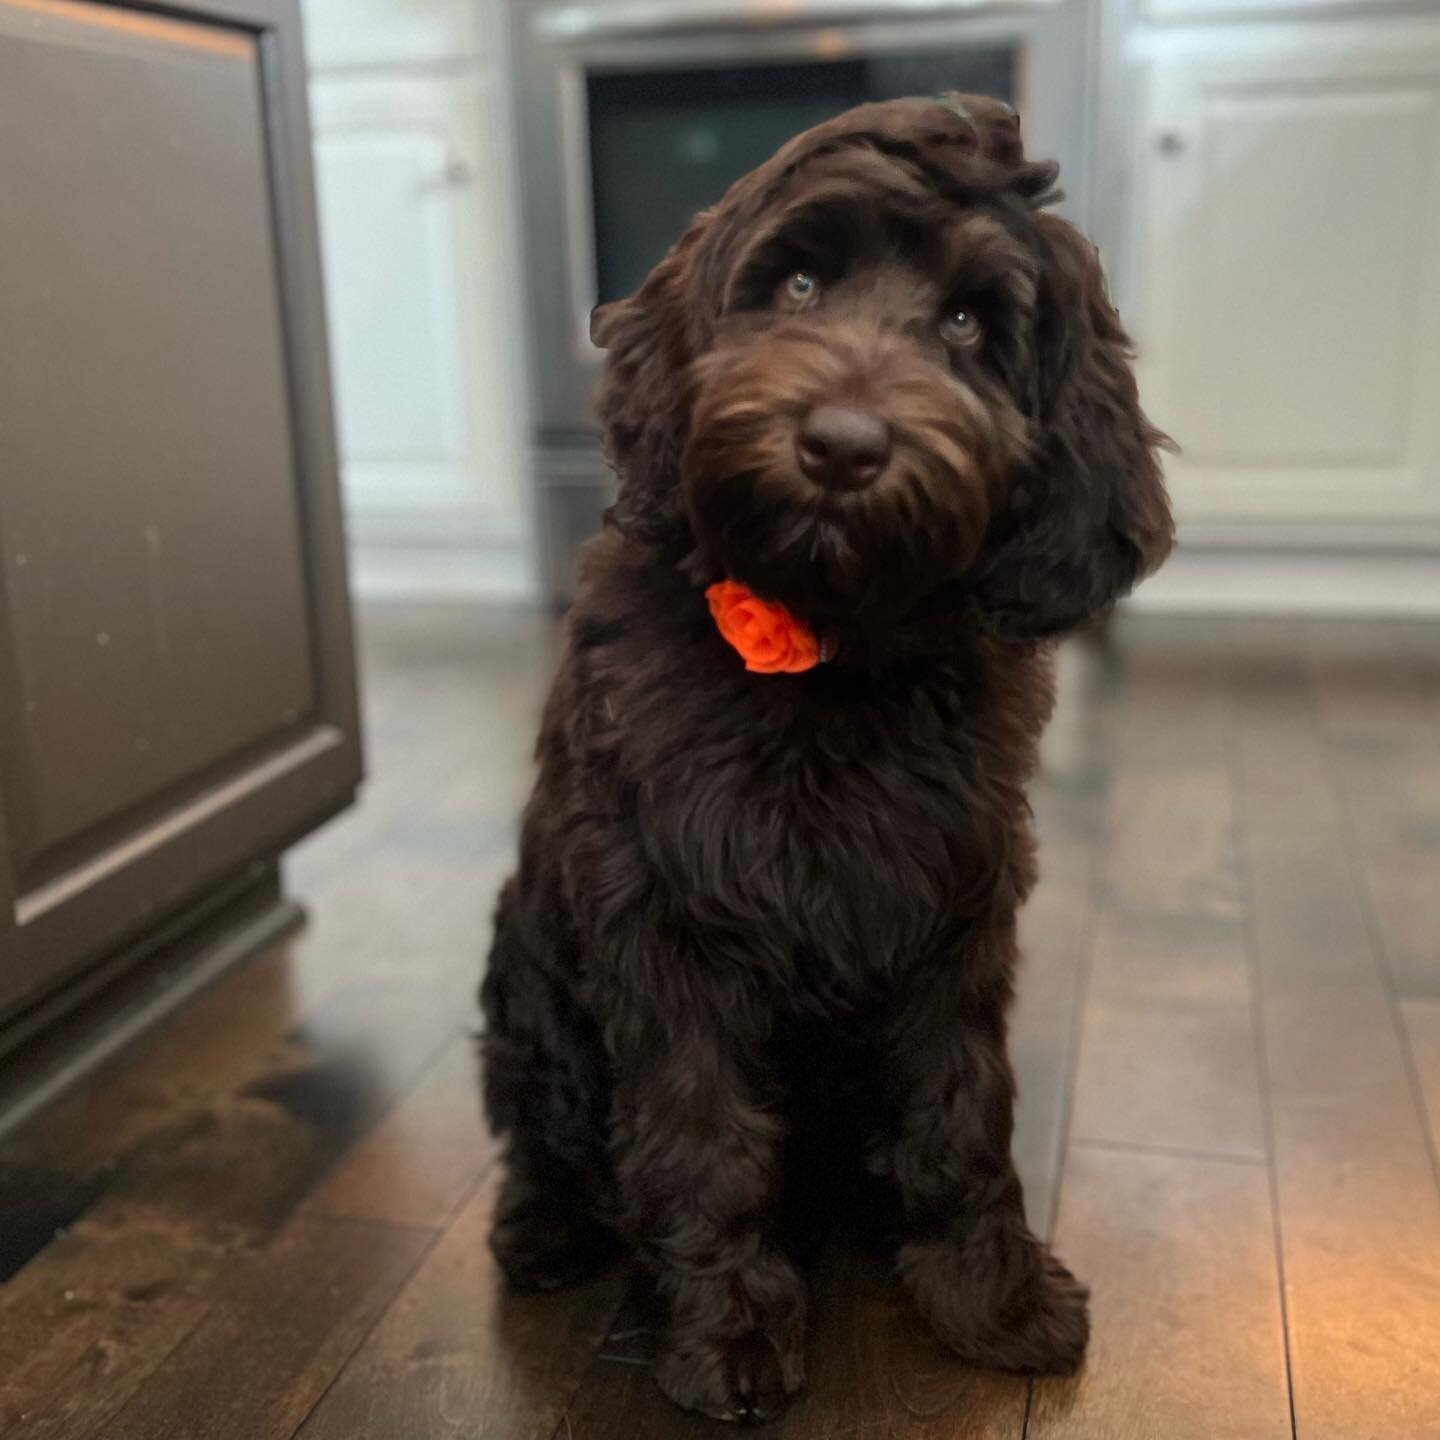 Charlie (Ellie/Lenny) bringing some cheer on this sunny Friday! She just received her first groom isn&rsquo;t she the cutest? 🌺

#ohiovalleylabradoodles #australianlabradoodles #australianlabradoodle #labradoodle #labradoodlepuppy #minilabradoodle #